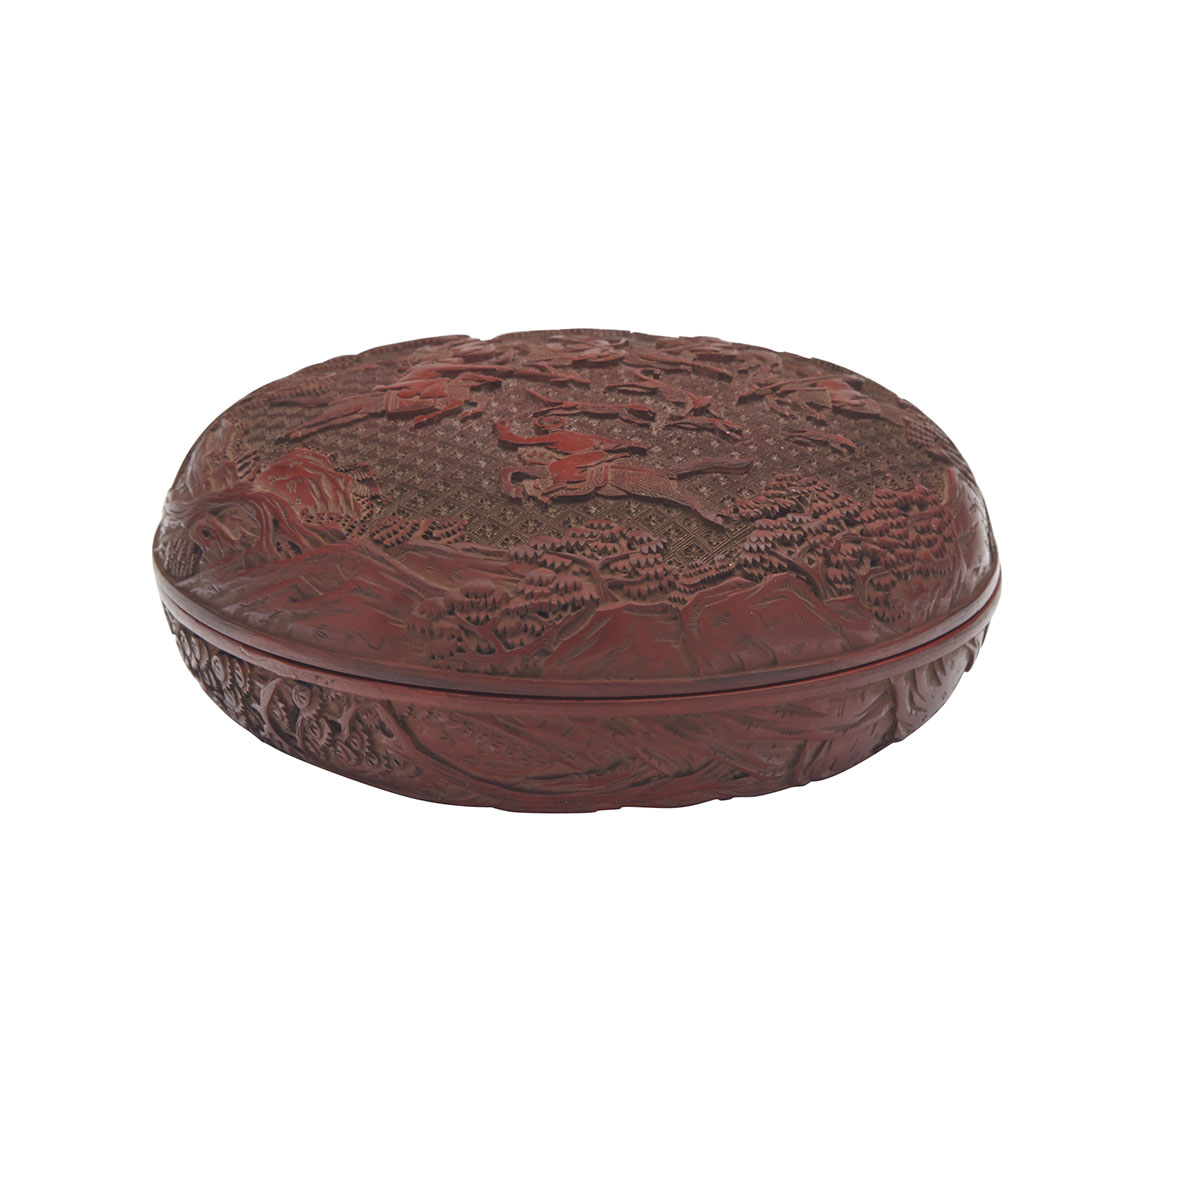 Red Lacquer Round Box and Cover, Early 20th Century